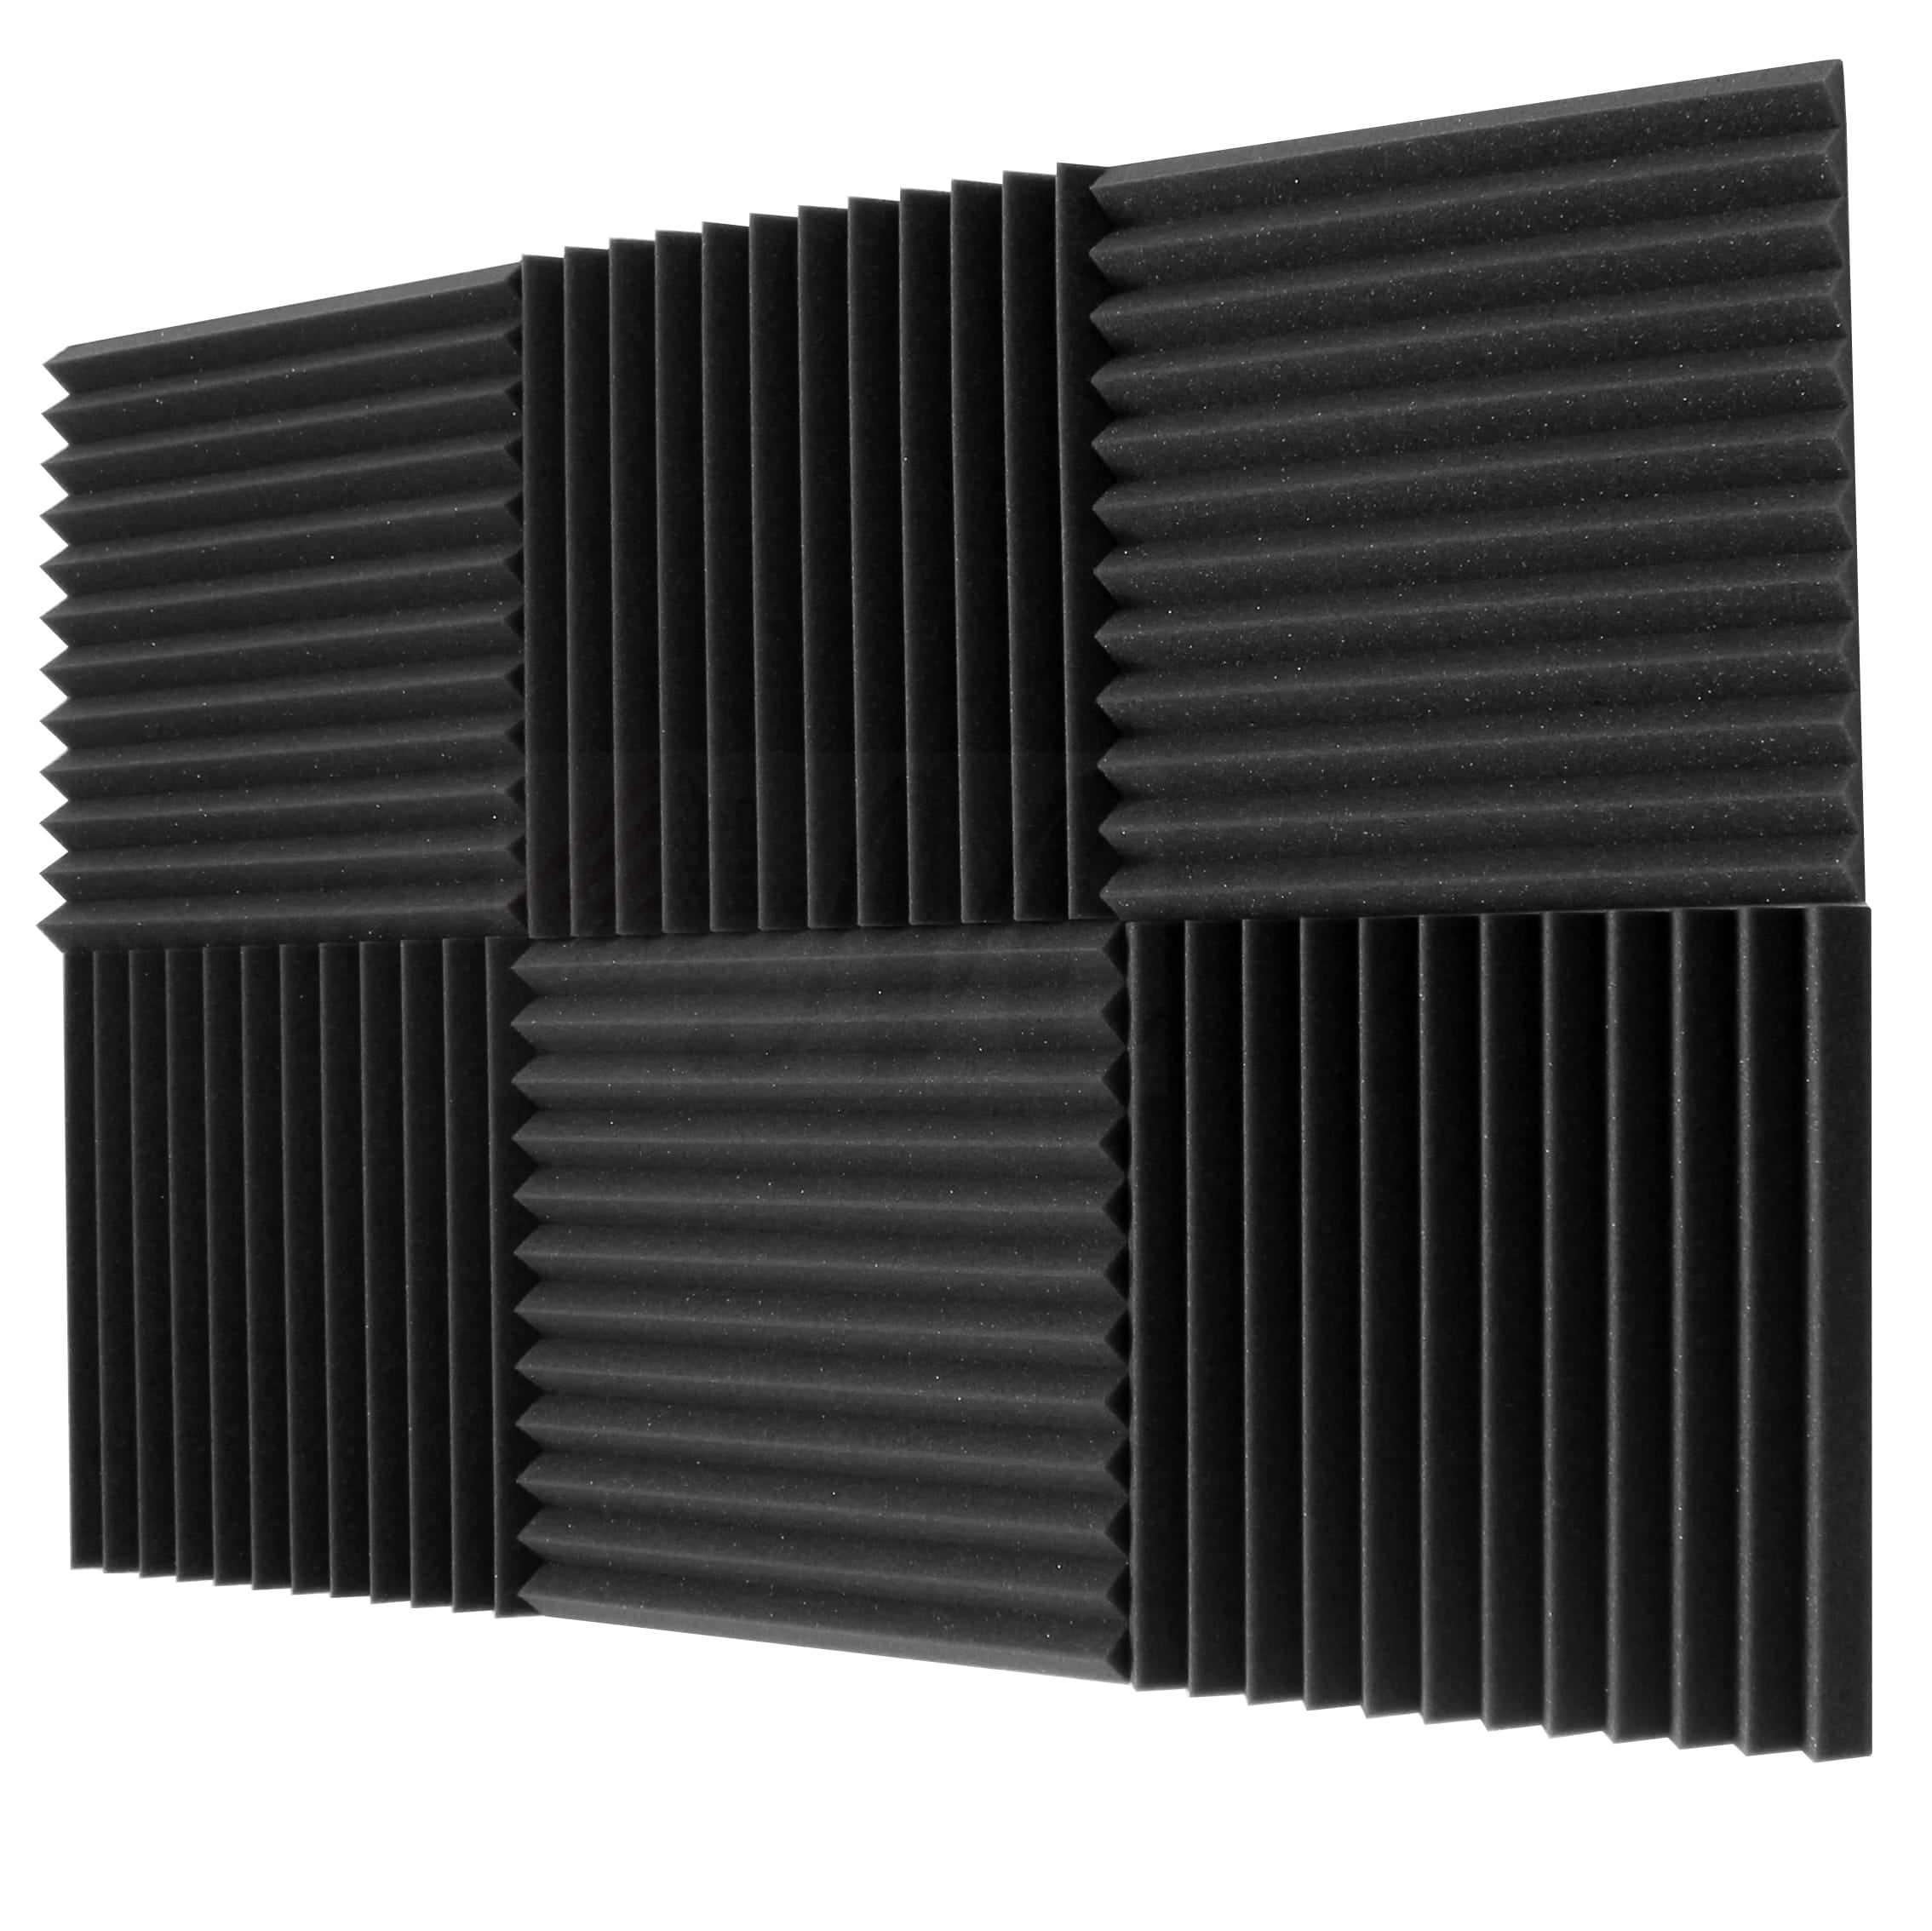 Good for Acoustic Treatment and Decoration 2 X 12 X 12 Gray Webetop Acoustic Foam 12 Pack 2 inches Thickness Acoustic Panels,9 Block Tiles Studio Foam with Adhesive Tape 